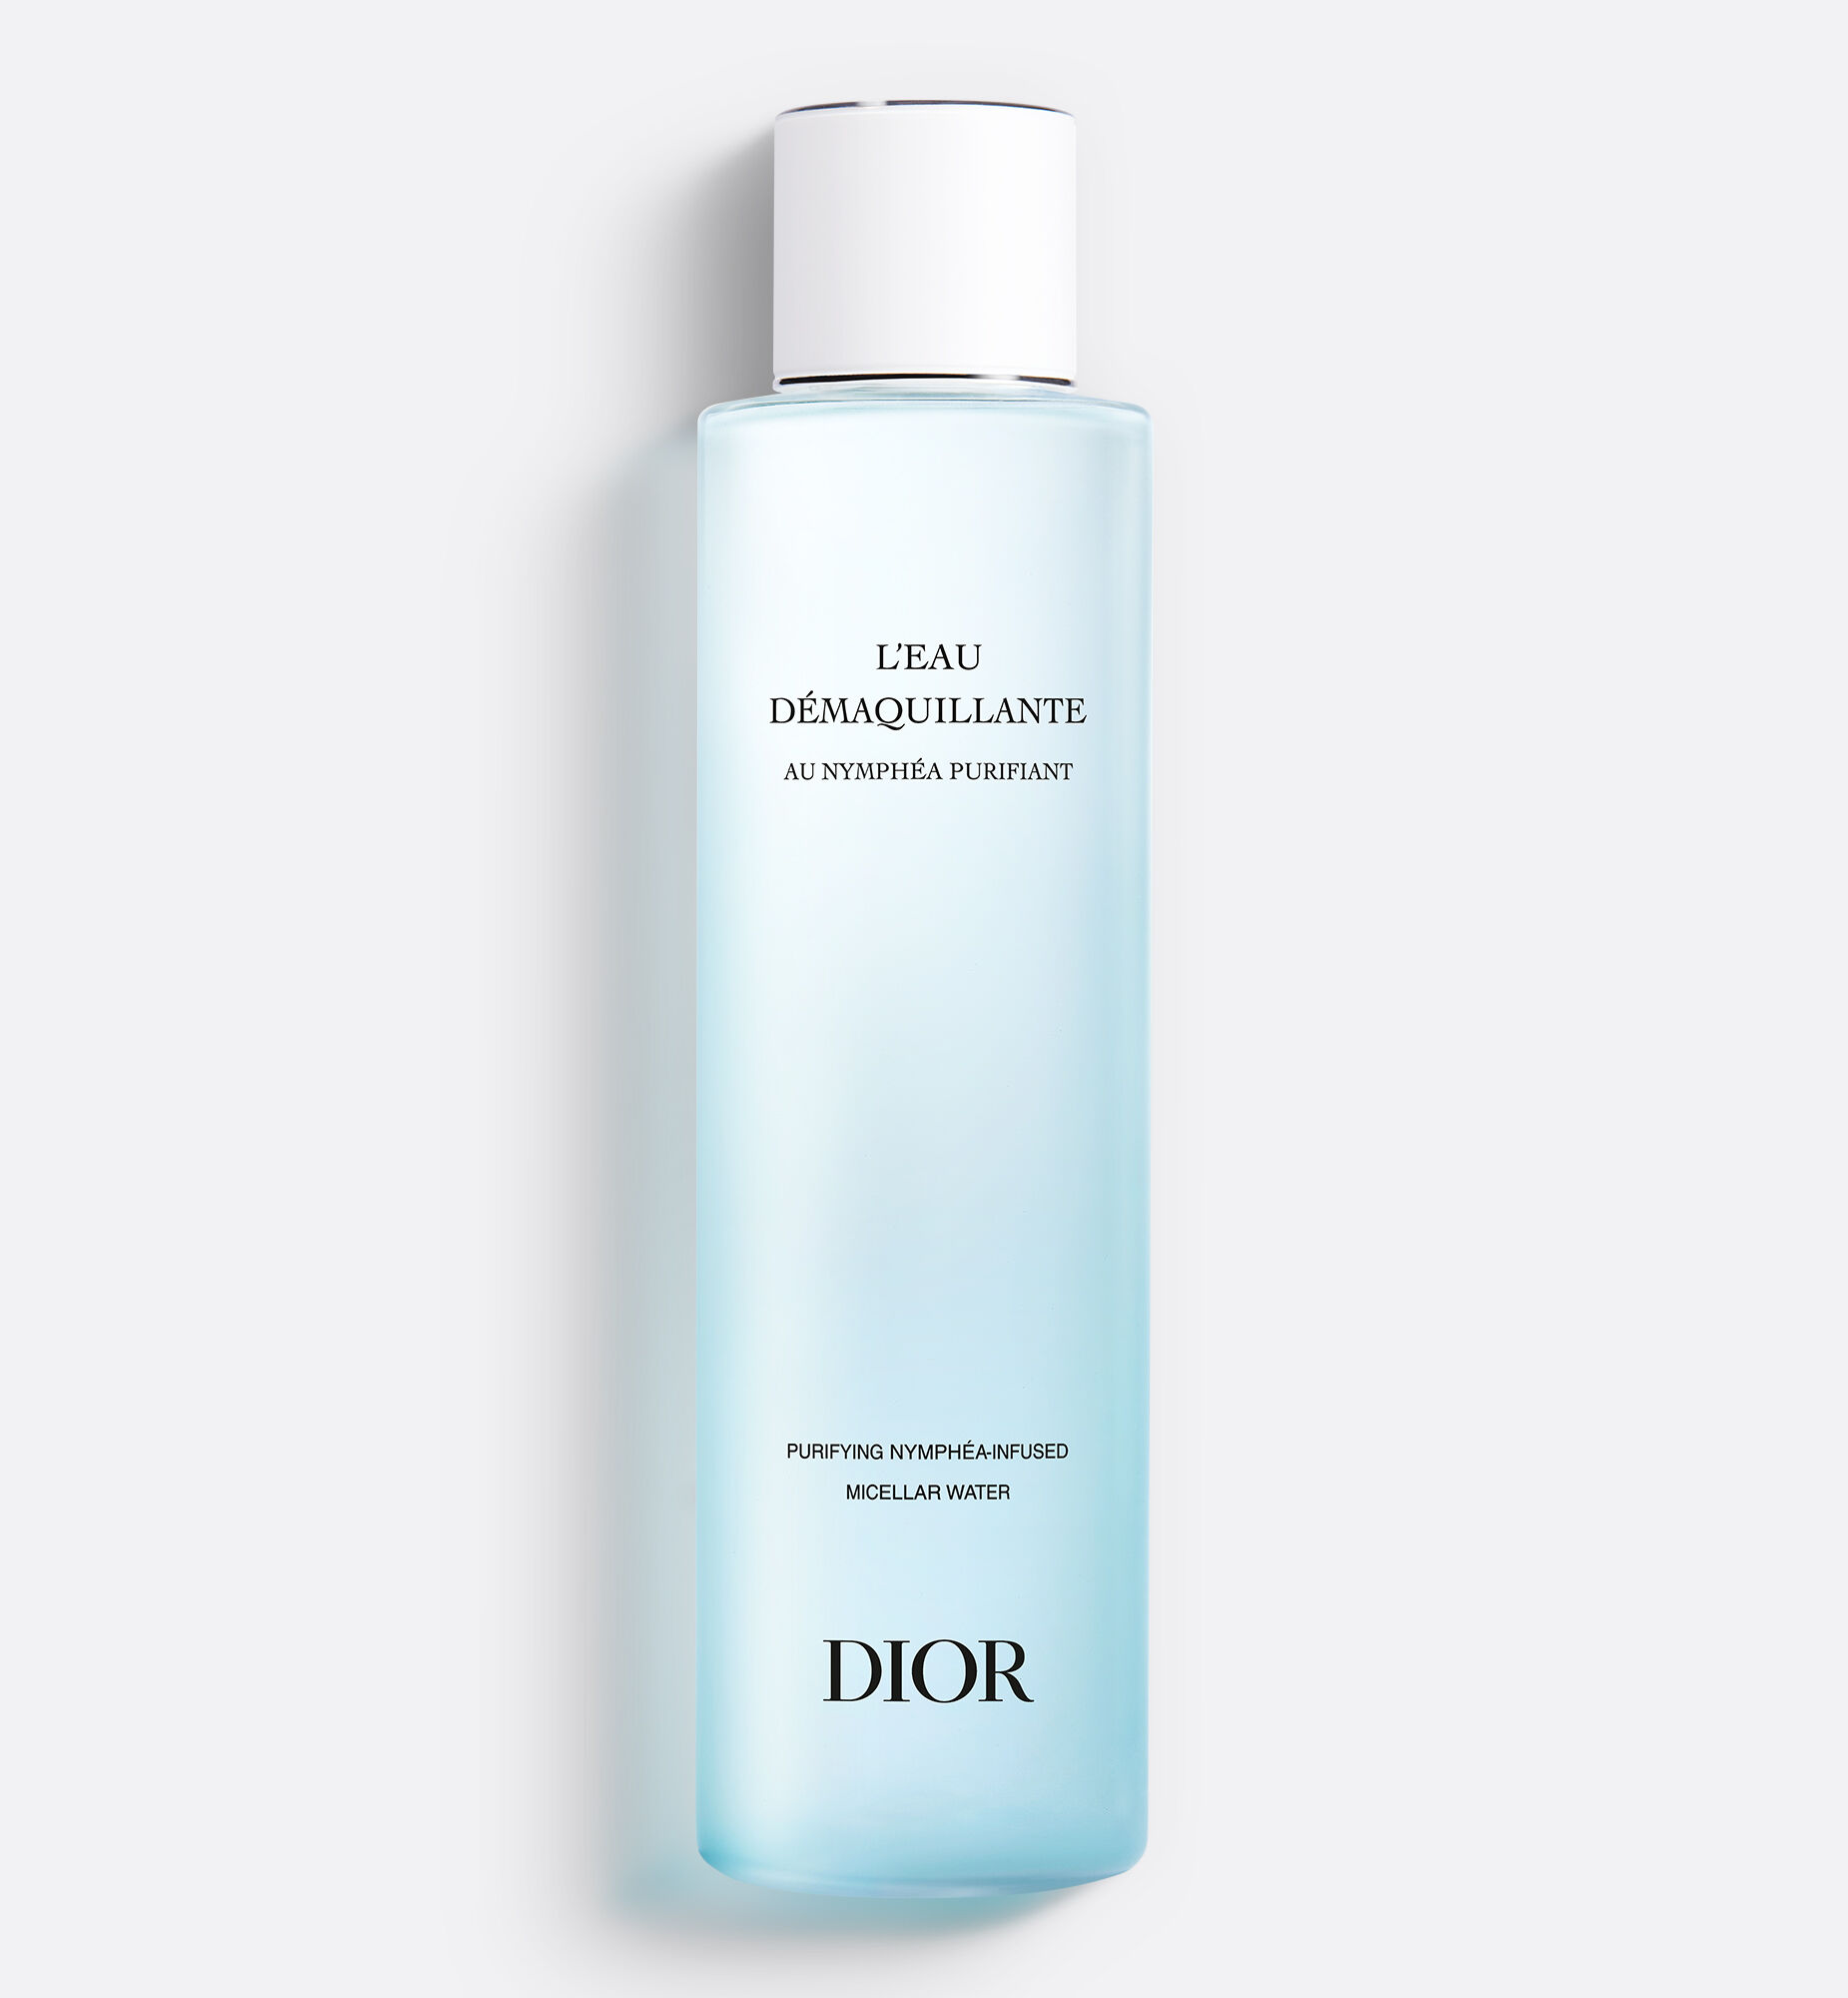 DIOR CLEANSERS  Eye and Lip Makeup Remover with Purifying French Wate   Dior Online Boutique Australia